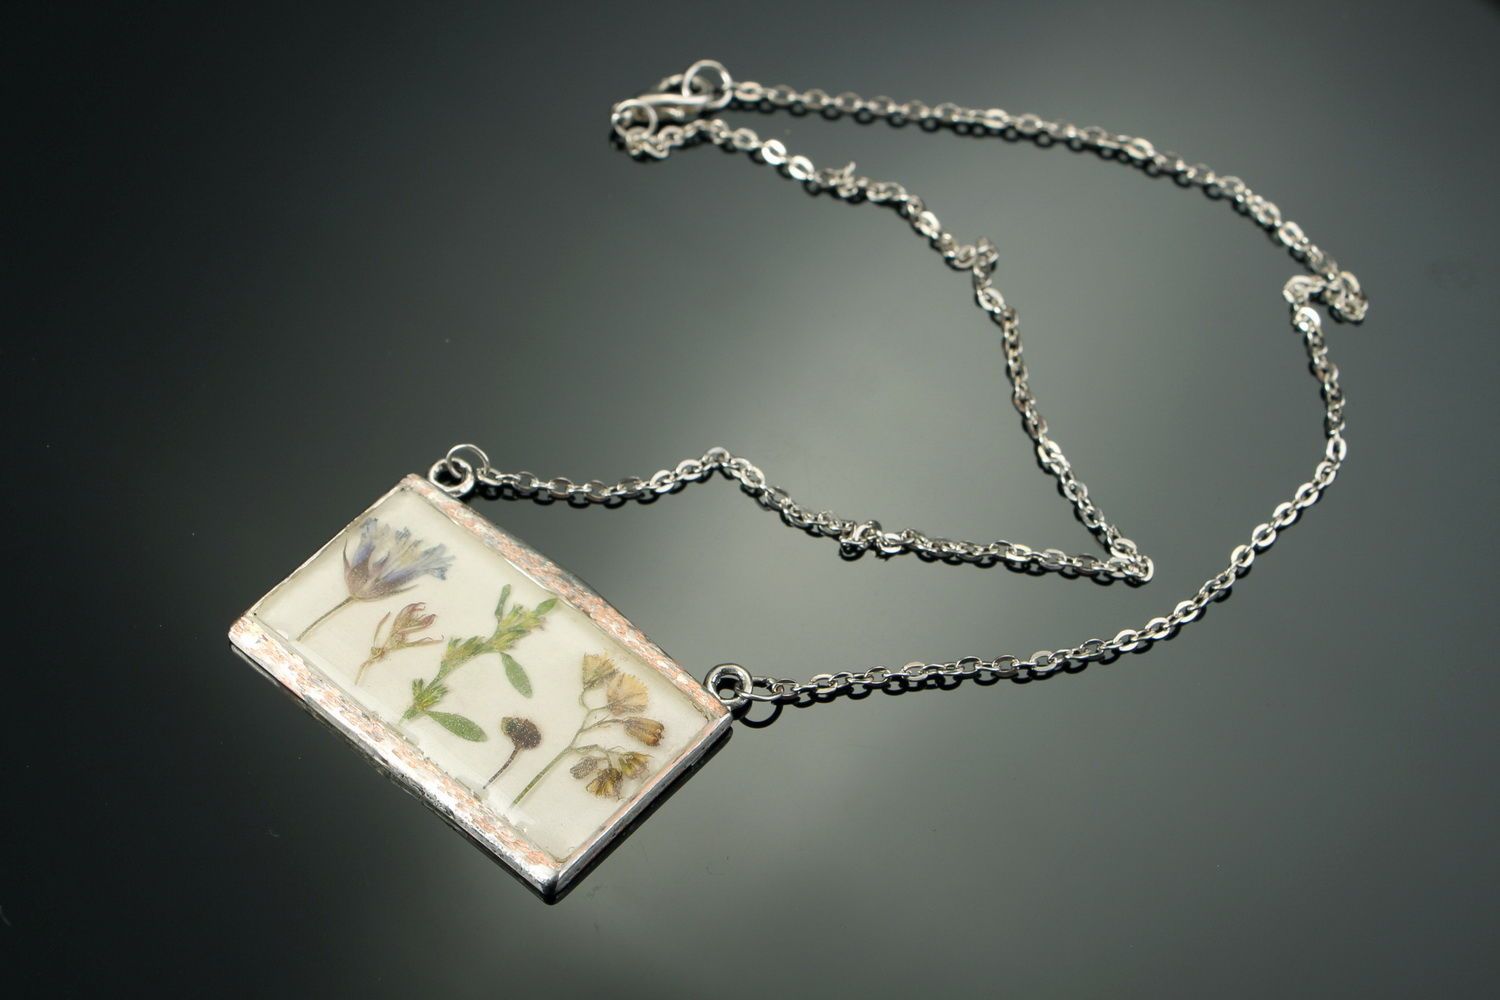 Necklace made of flowers, coated with epoxy resin photo 1